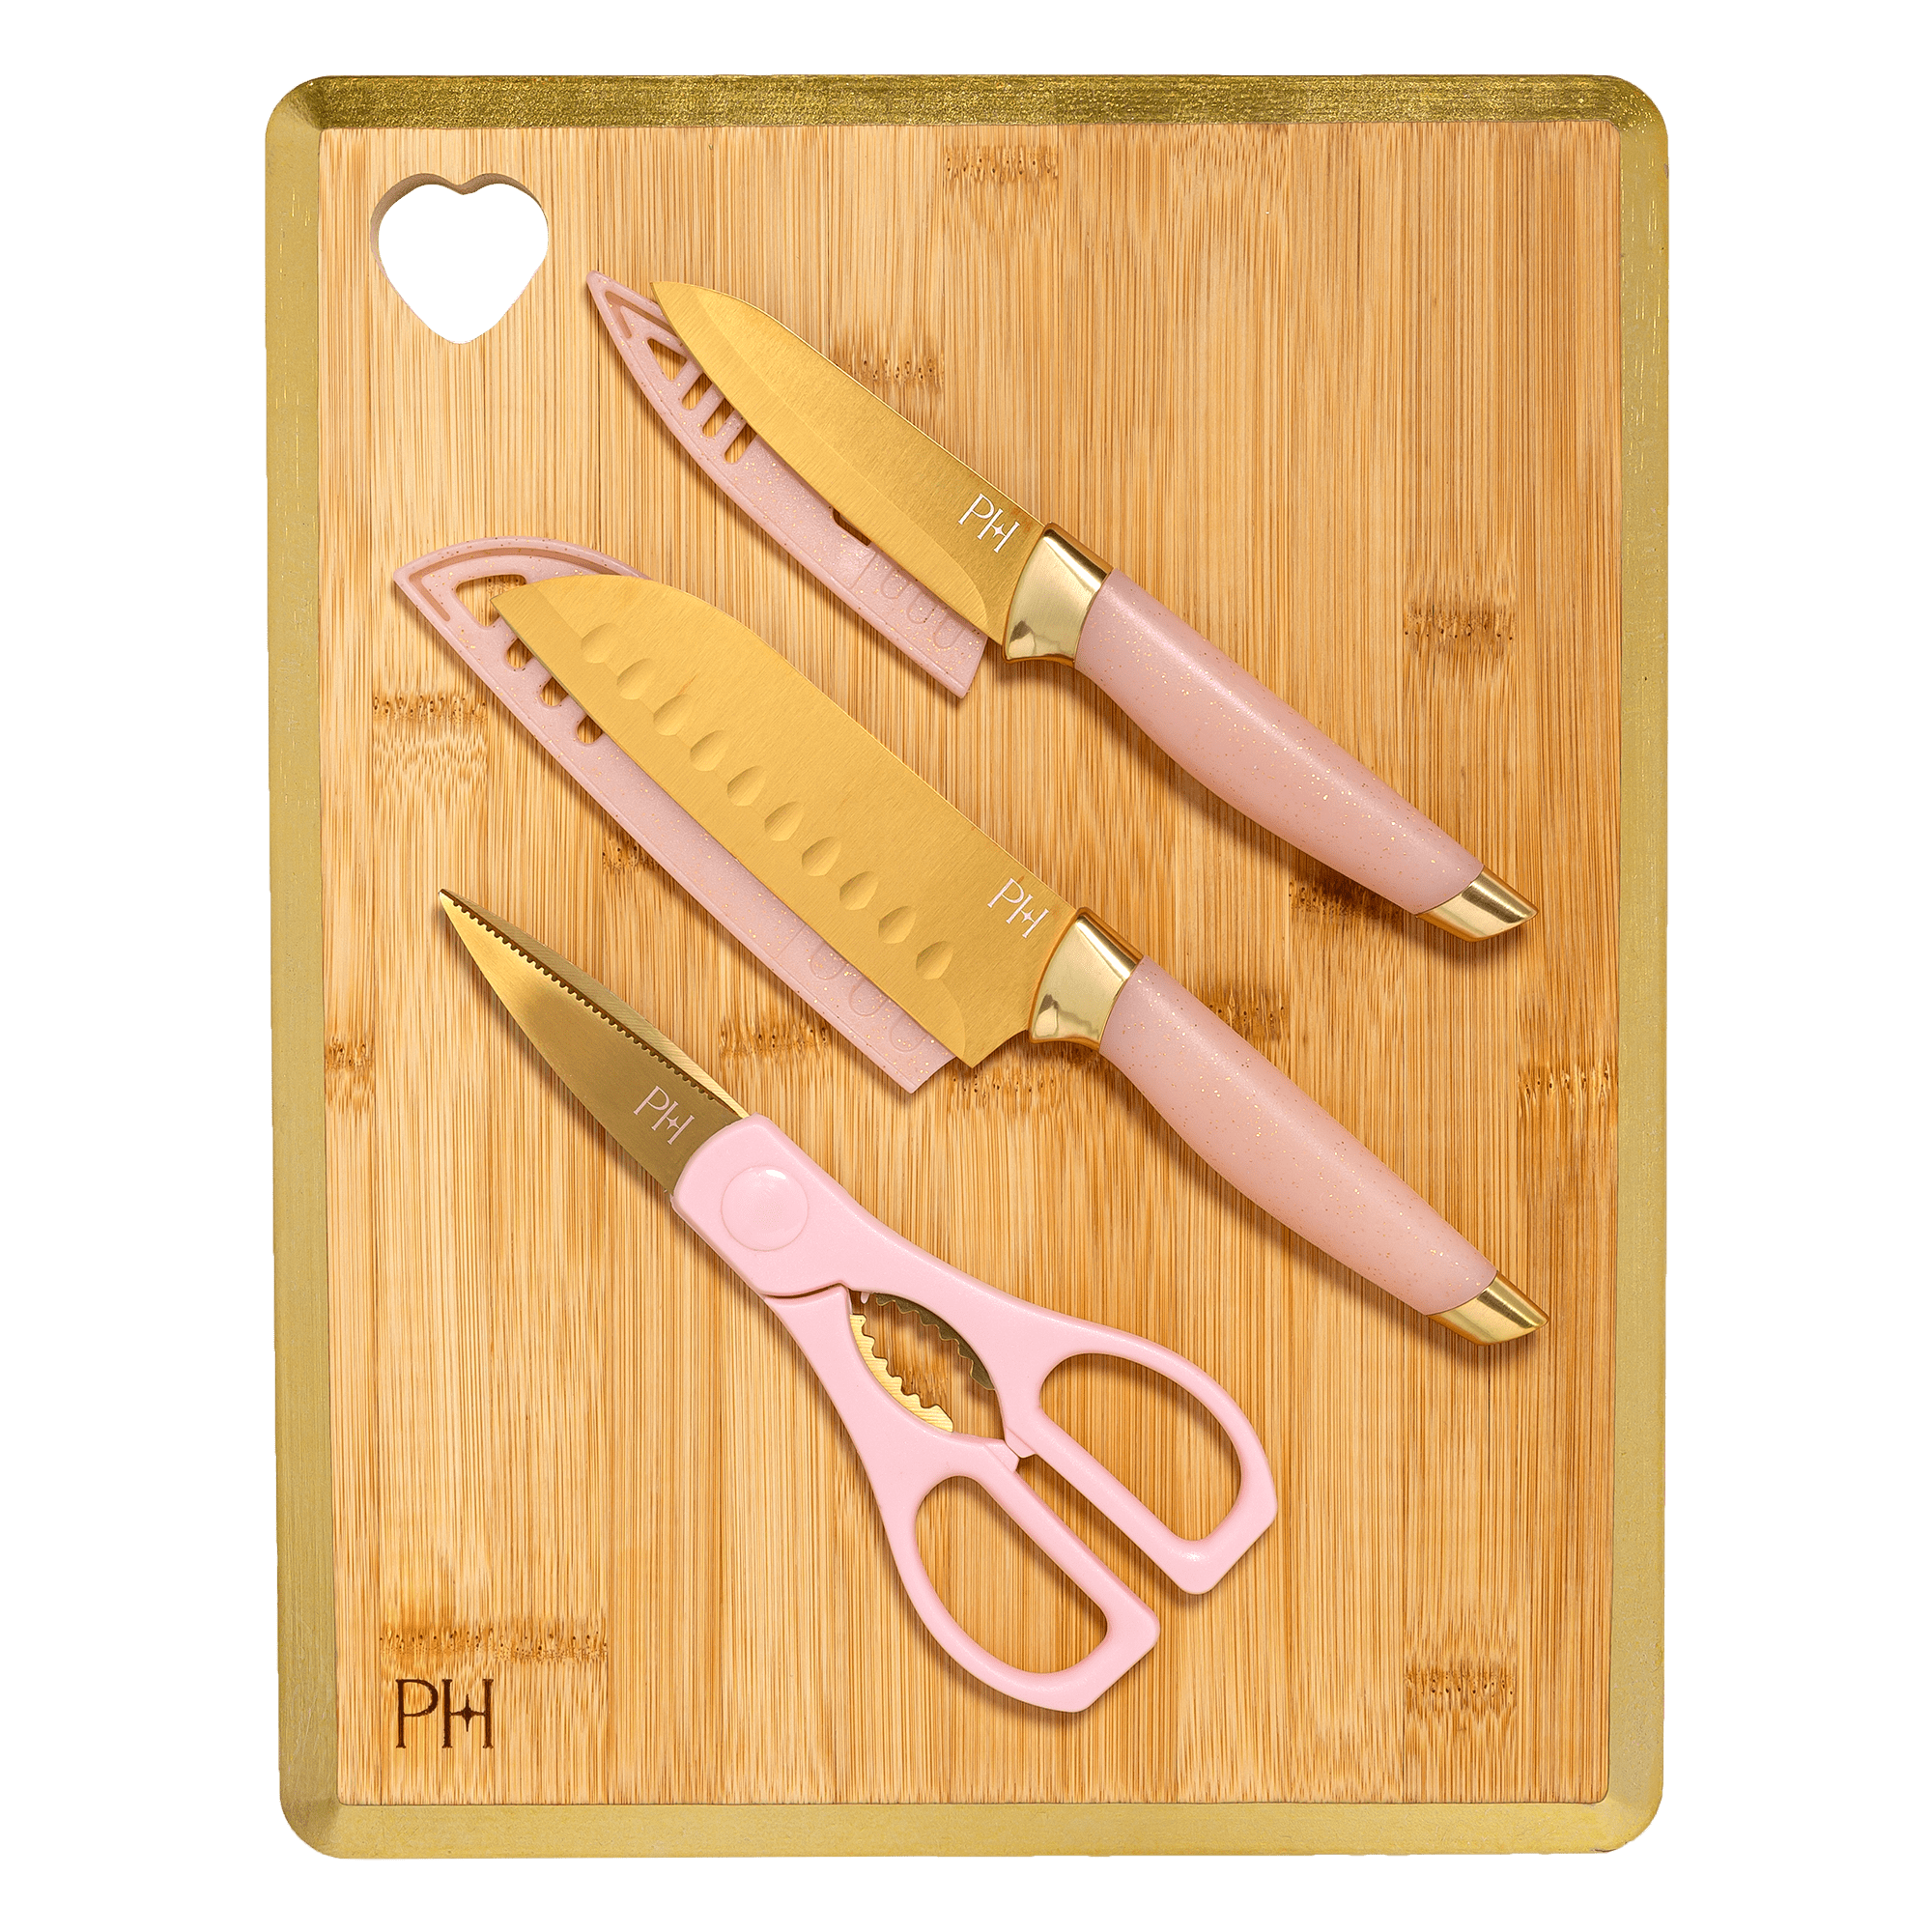 4-Piece Cutting Board Set with Knife & Shears, Charcoal